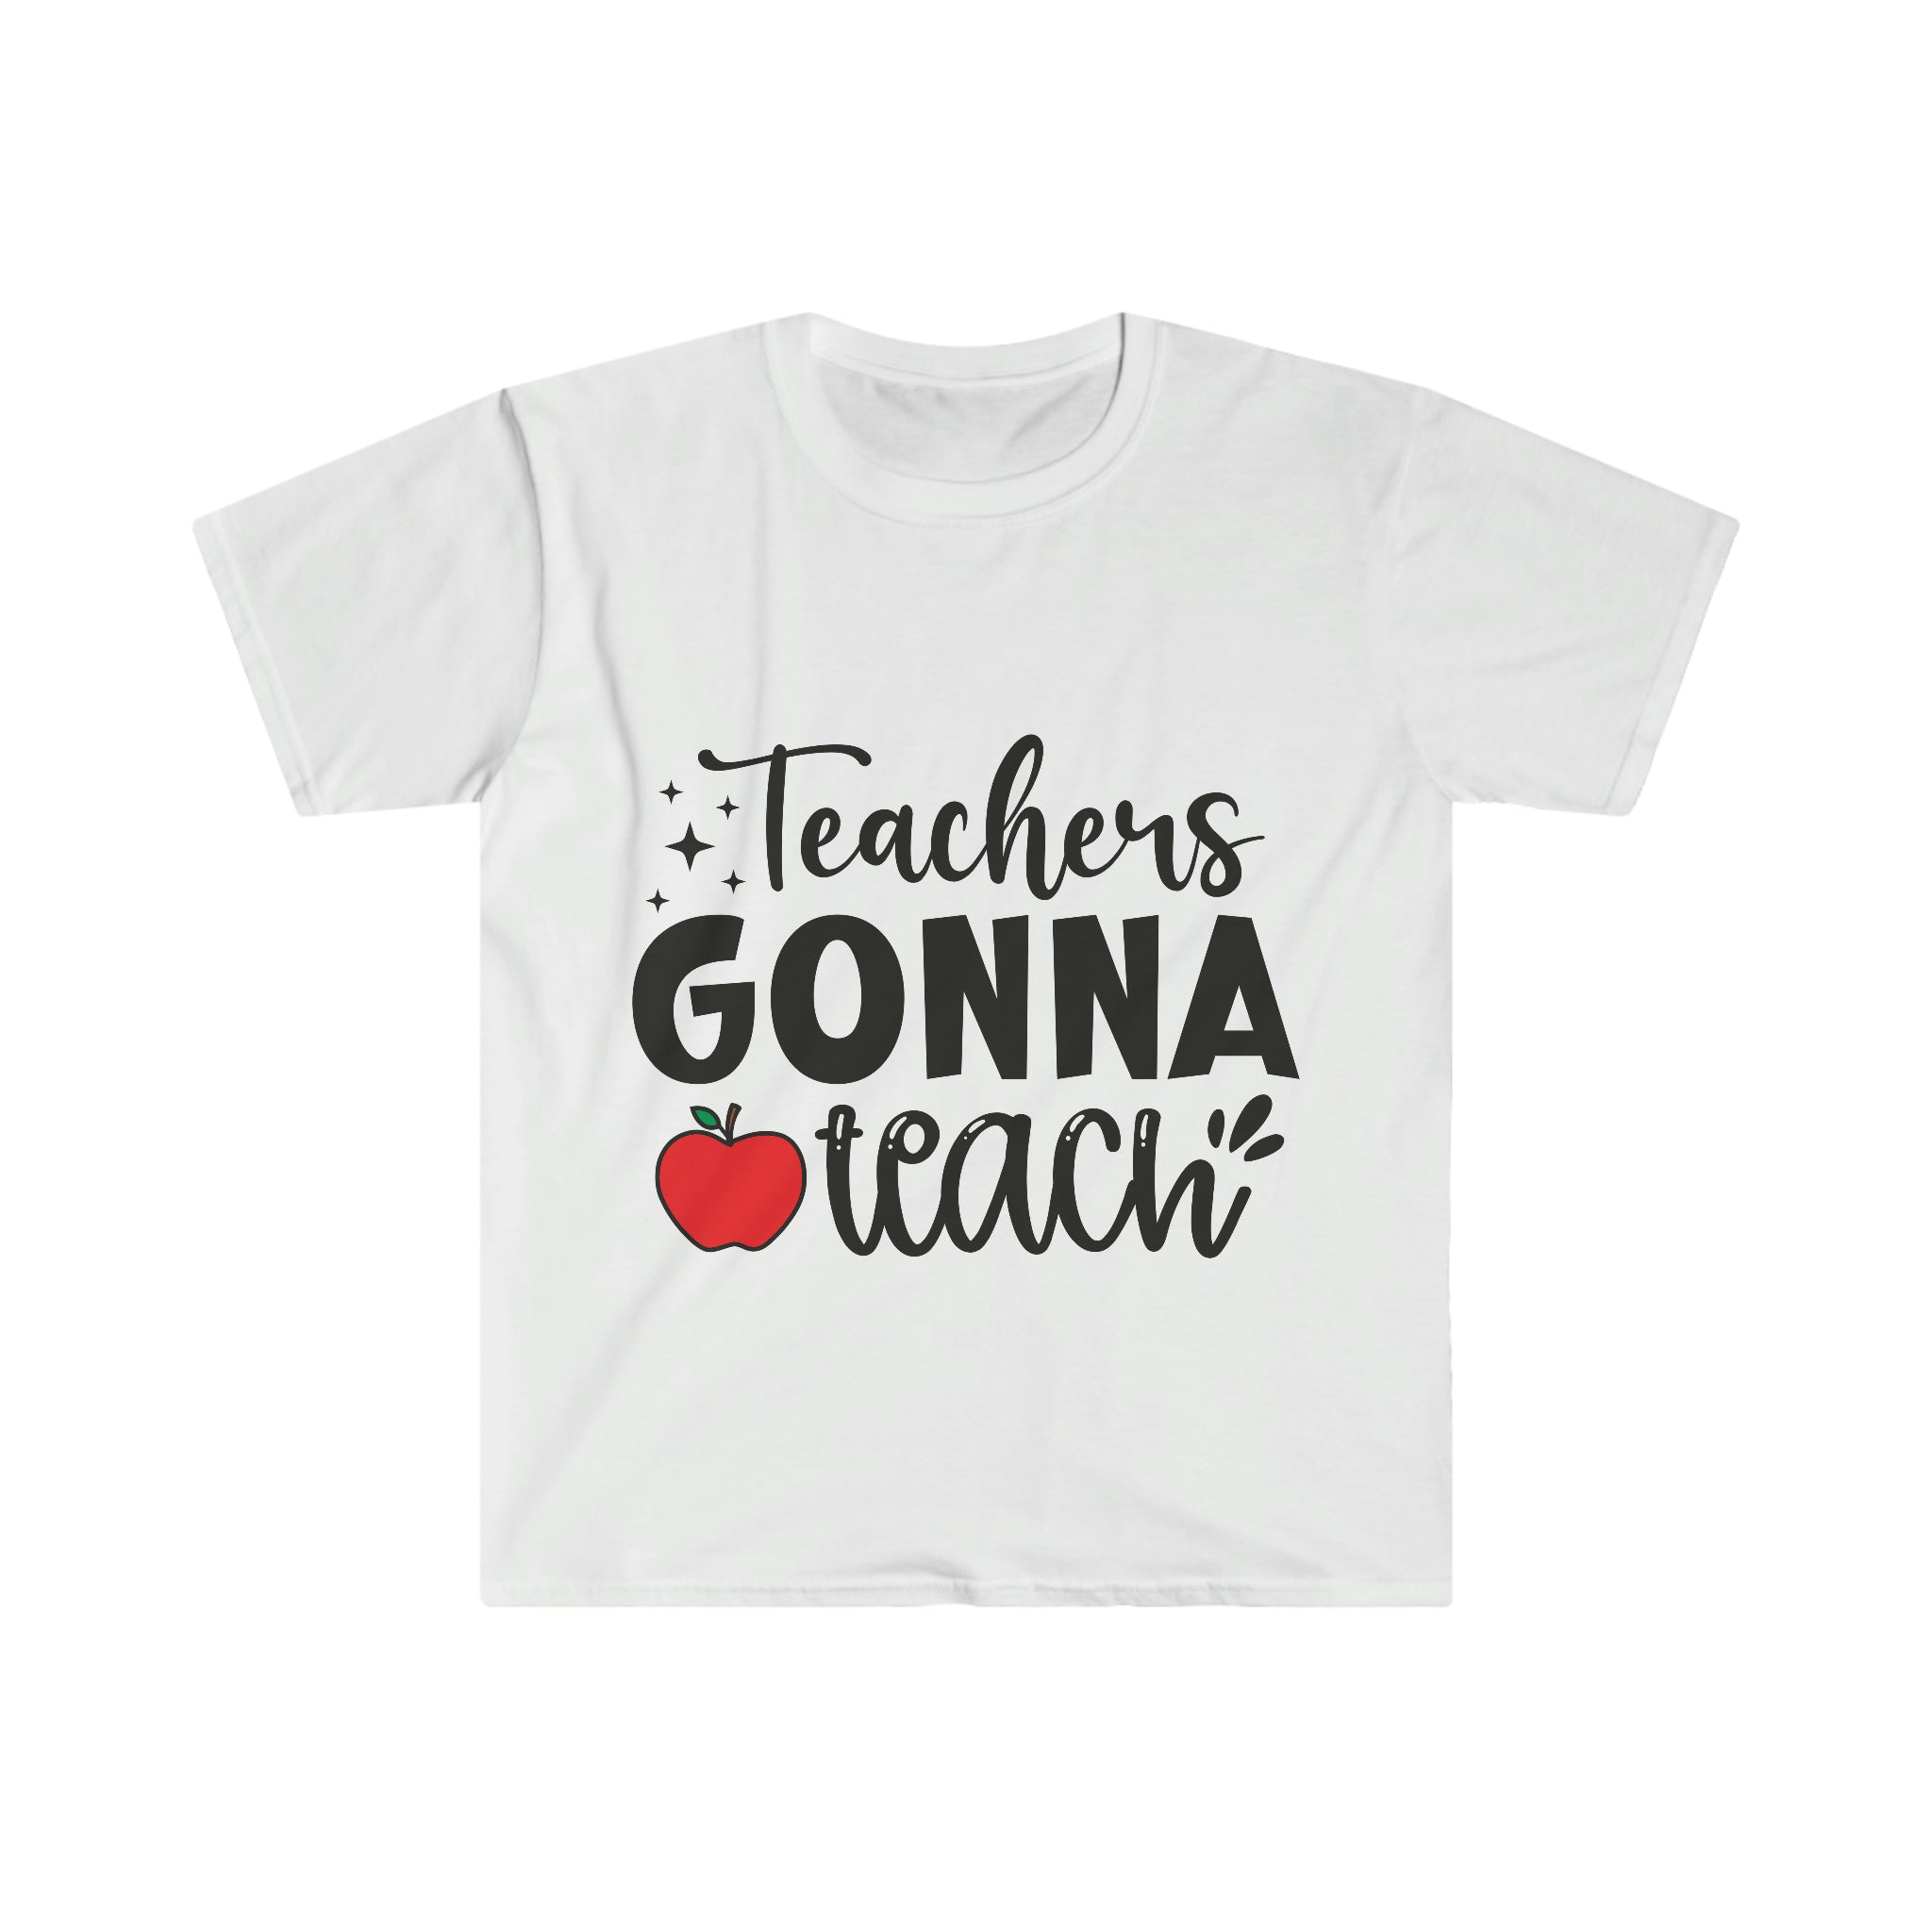 Show your support for teachers with this Teachers Gonna Teach T-Shirt that proudly displays the phrase "teachers gonna teach".